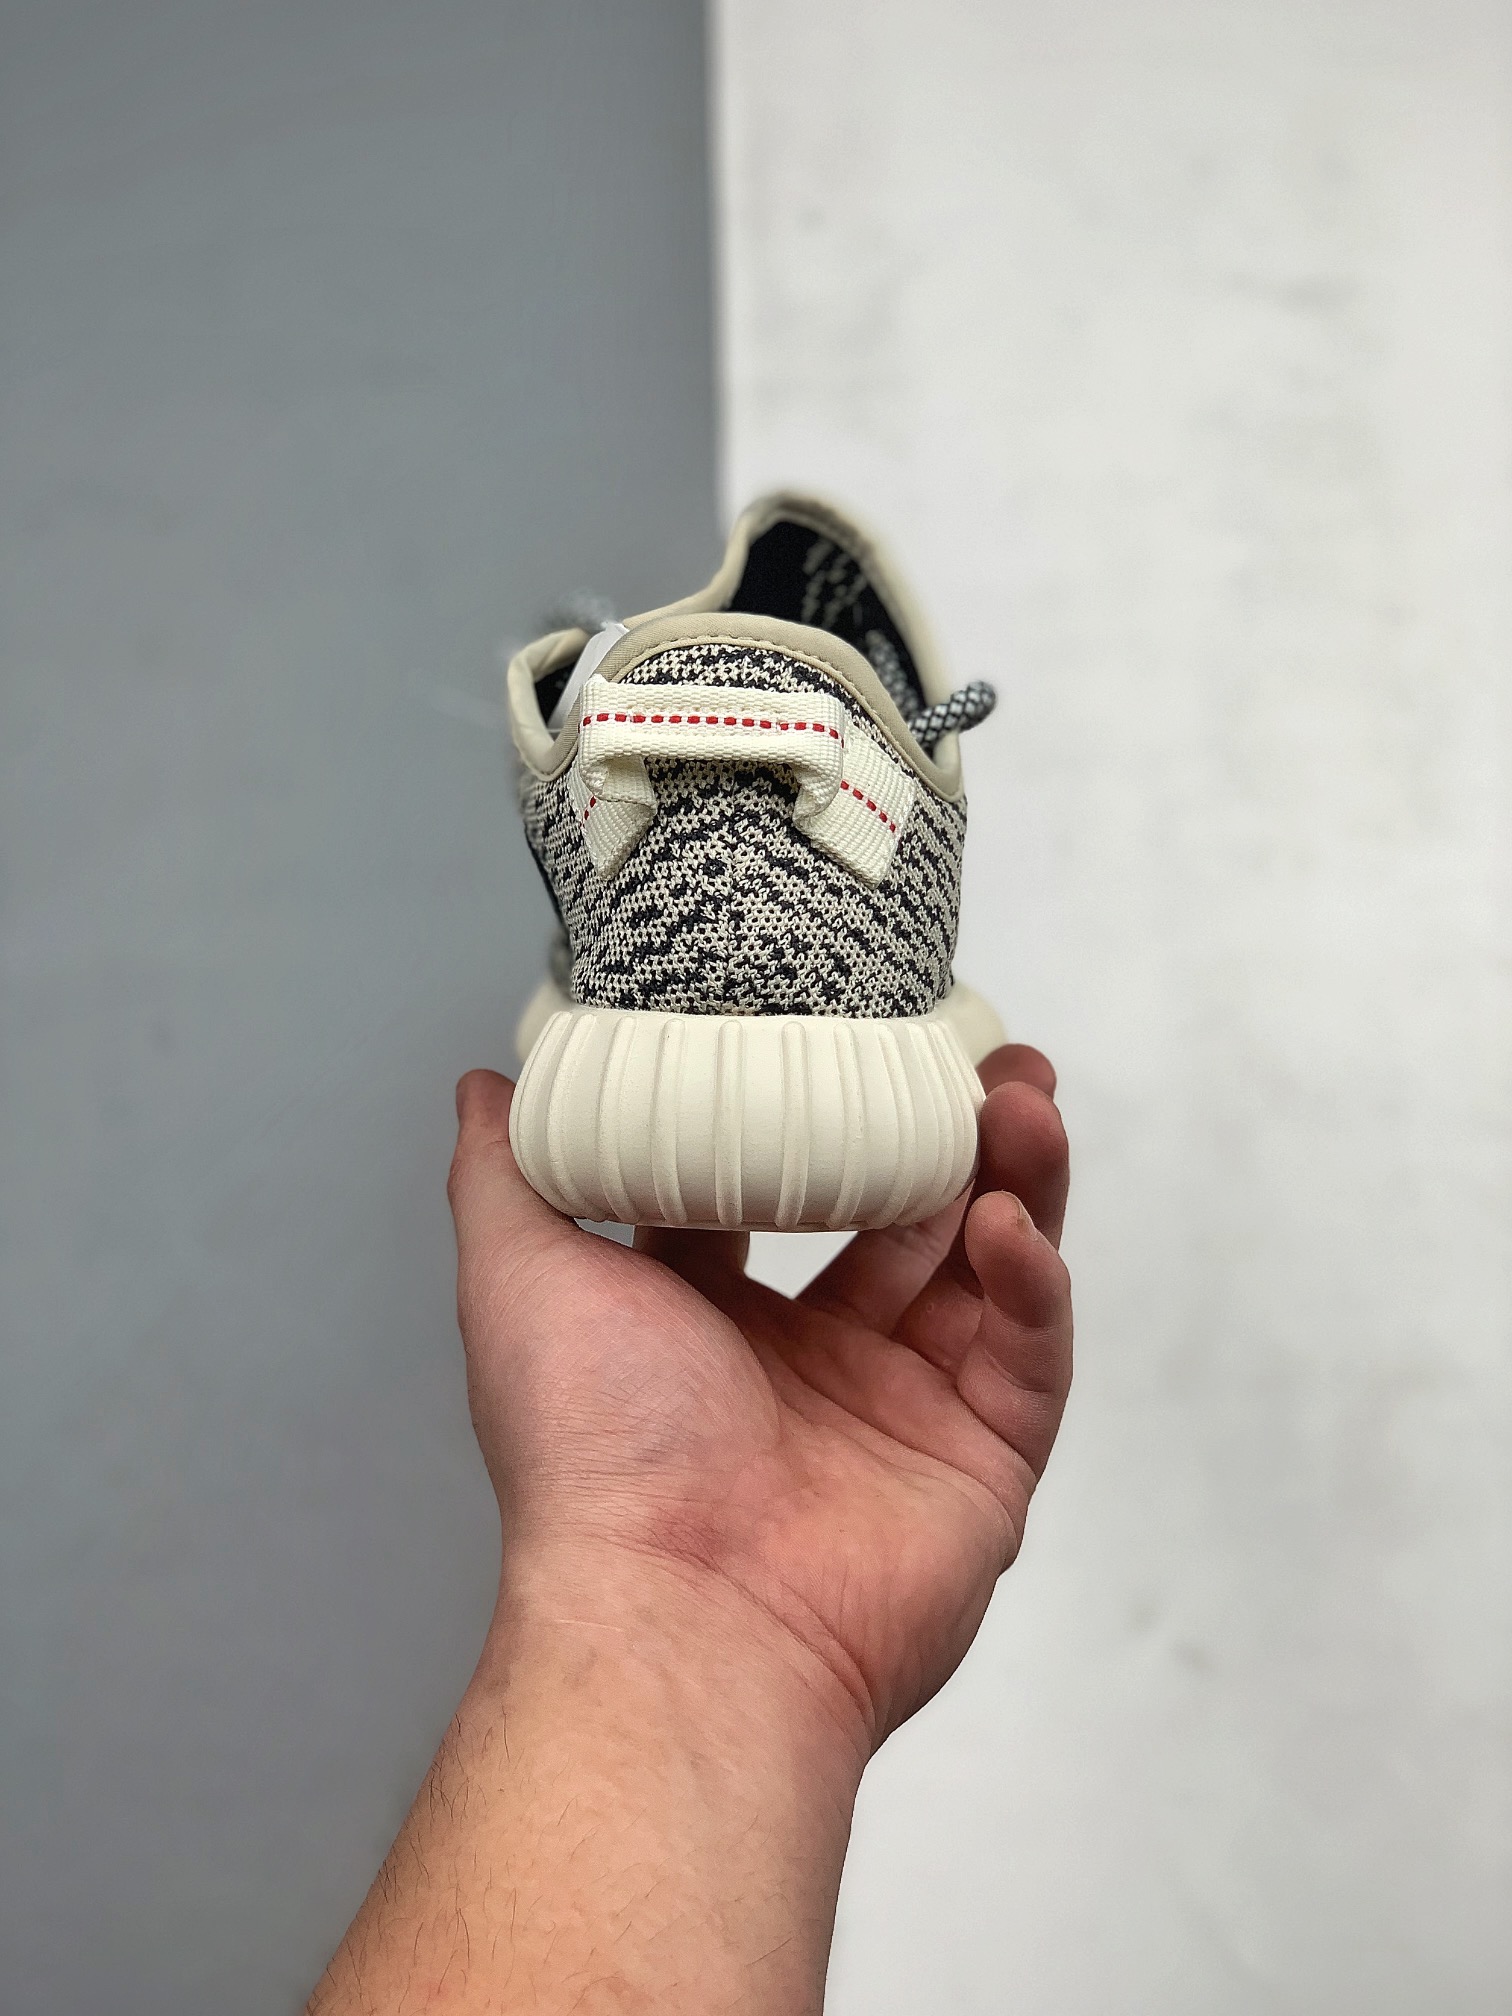 Adidas Yeezy 350 Boost Turtle Dove AQ4832 - Shop the Iconic Sneaker Online